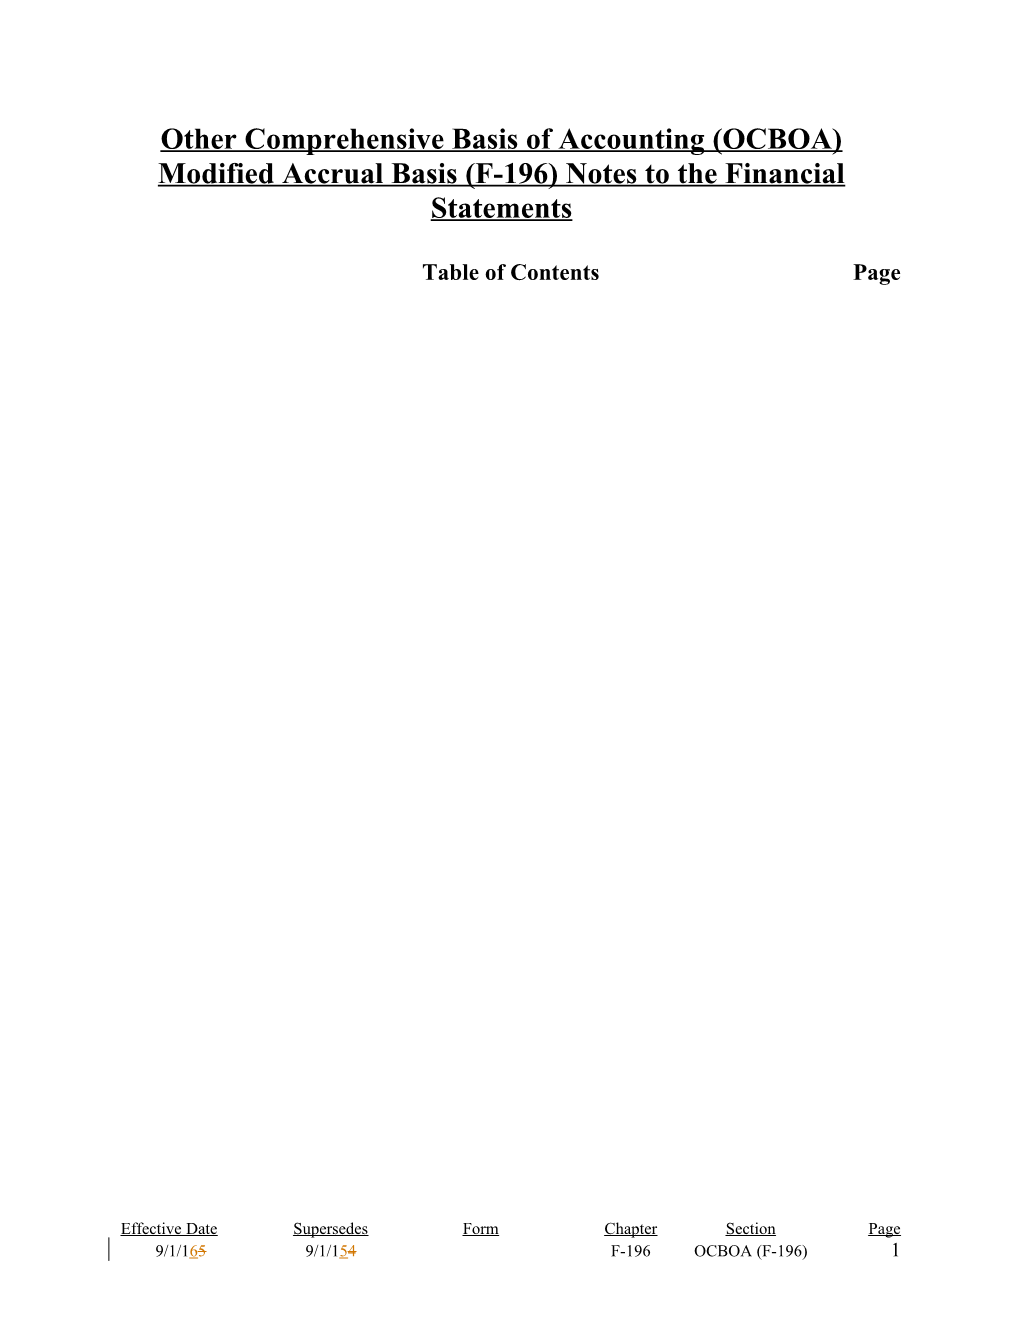 Other Comprehensive Basis of Accounting (OCBOA) Modified Accrual Basis (F-196) Notes To